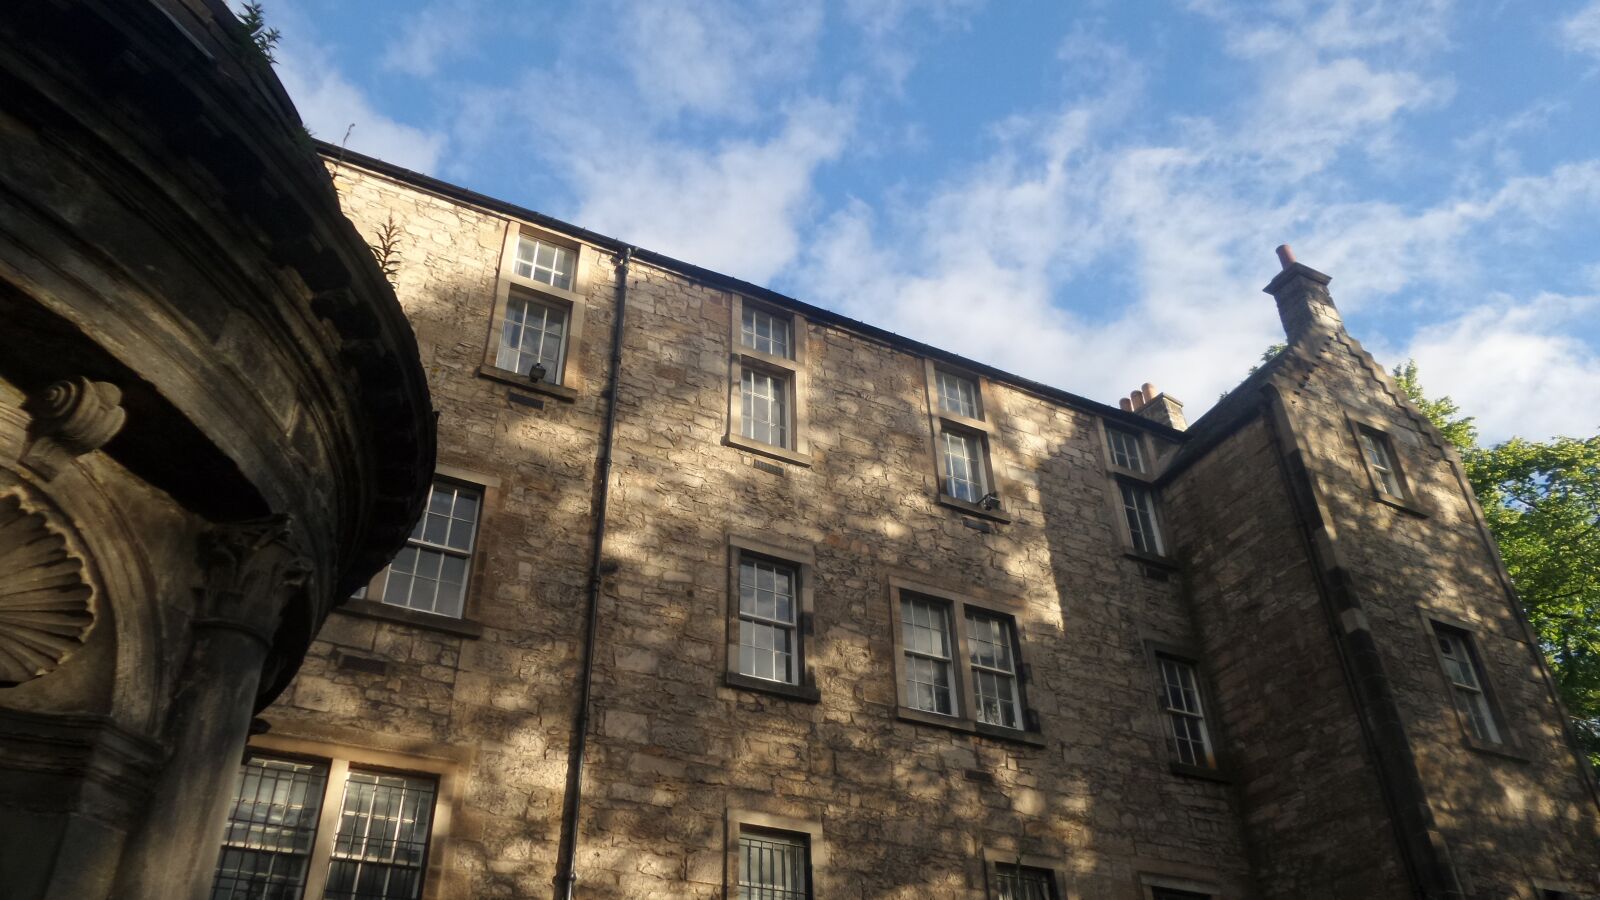 Samsung Galaxy K Zoom sample photo. Greyfriars, old, architecture photography